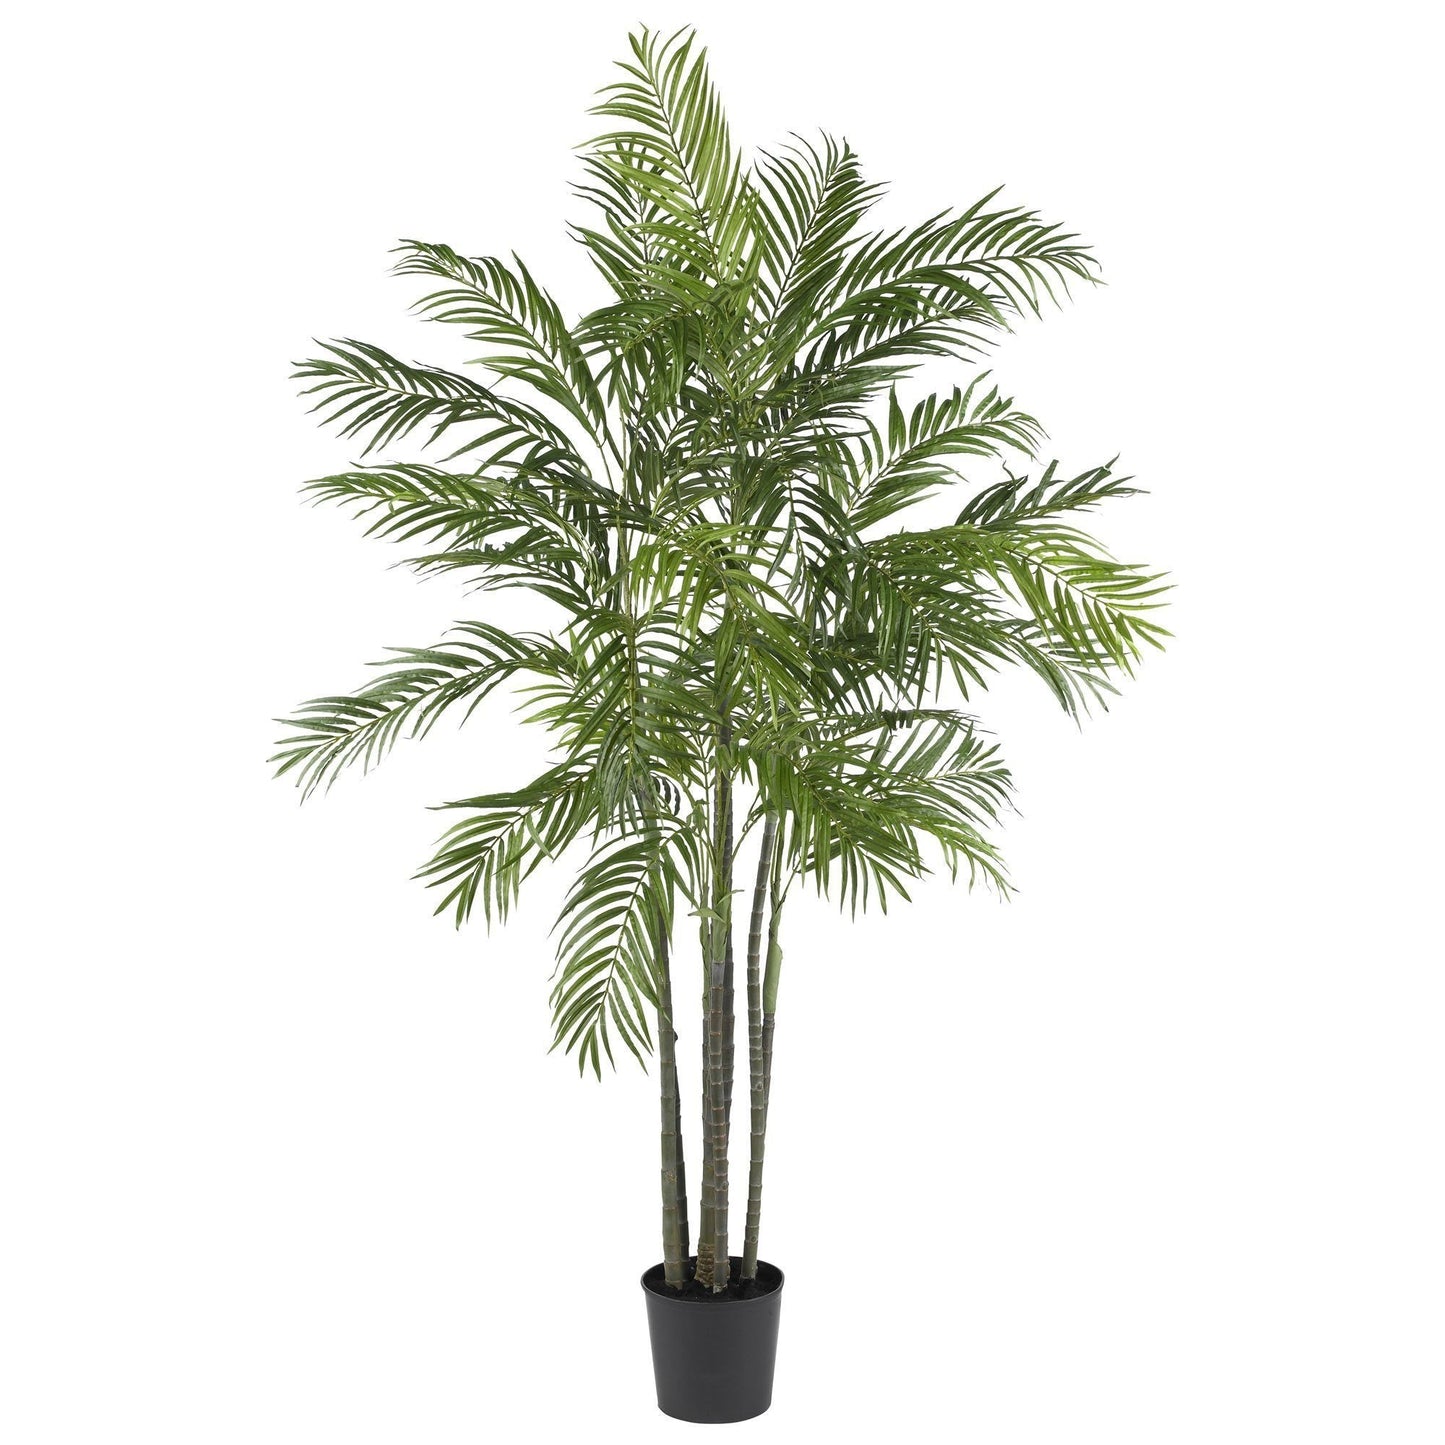 6' Tropic Artificial Areca Palm Silk Tree by Nearly Natural